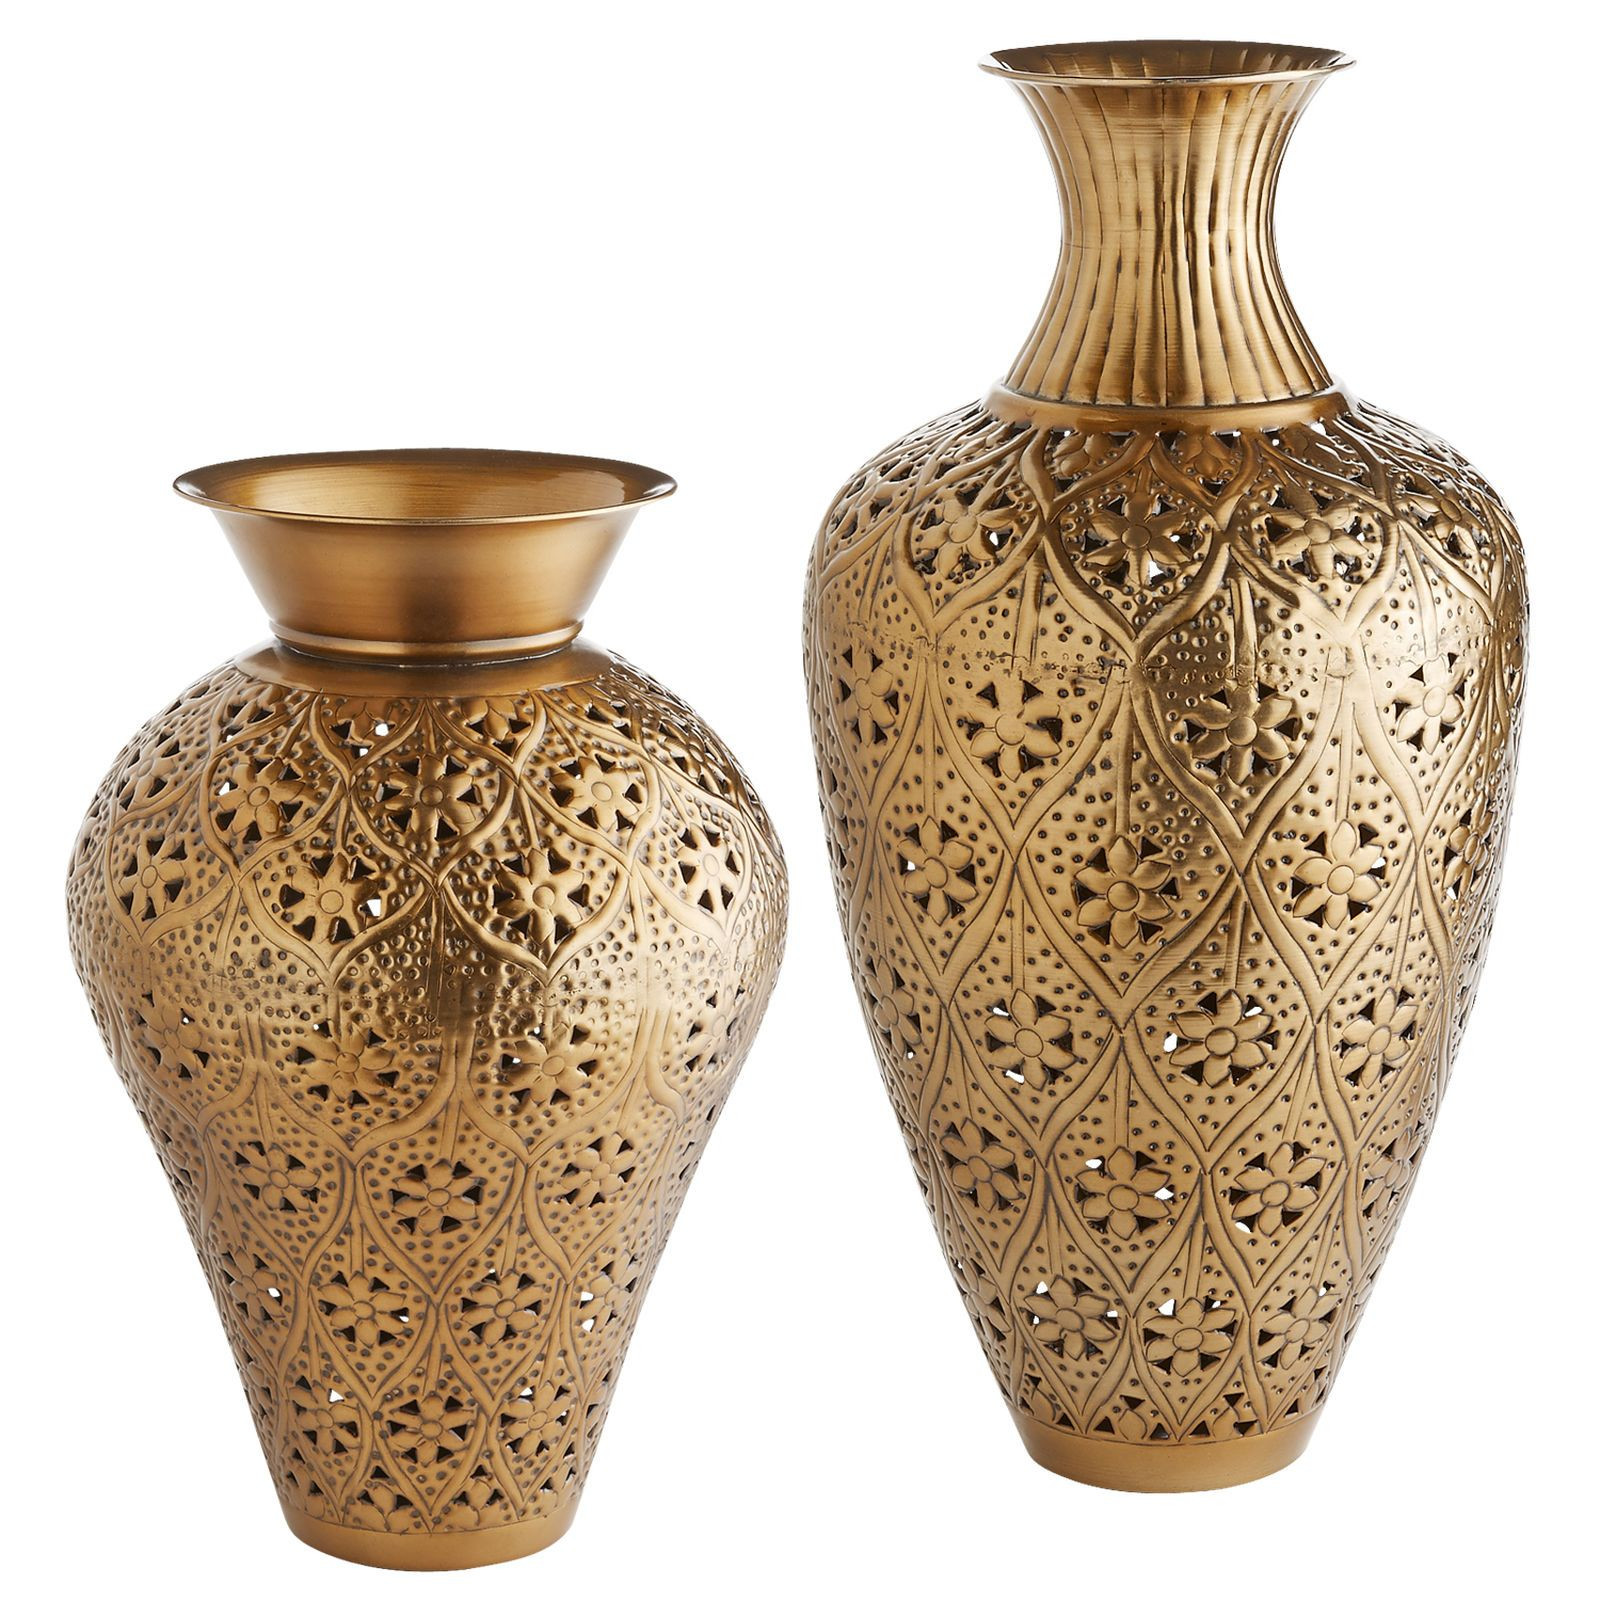 20 Stylish Vases Accent Pieces 2024 free download vases accent pieces of found the perfect additions to your diverse collection our with regard to found the perfect additions to your diverse collection our unconventional vases evoke that bo